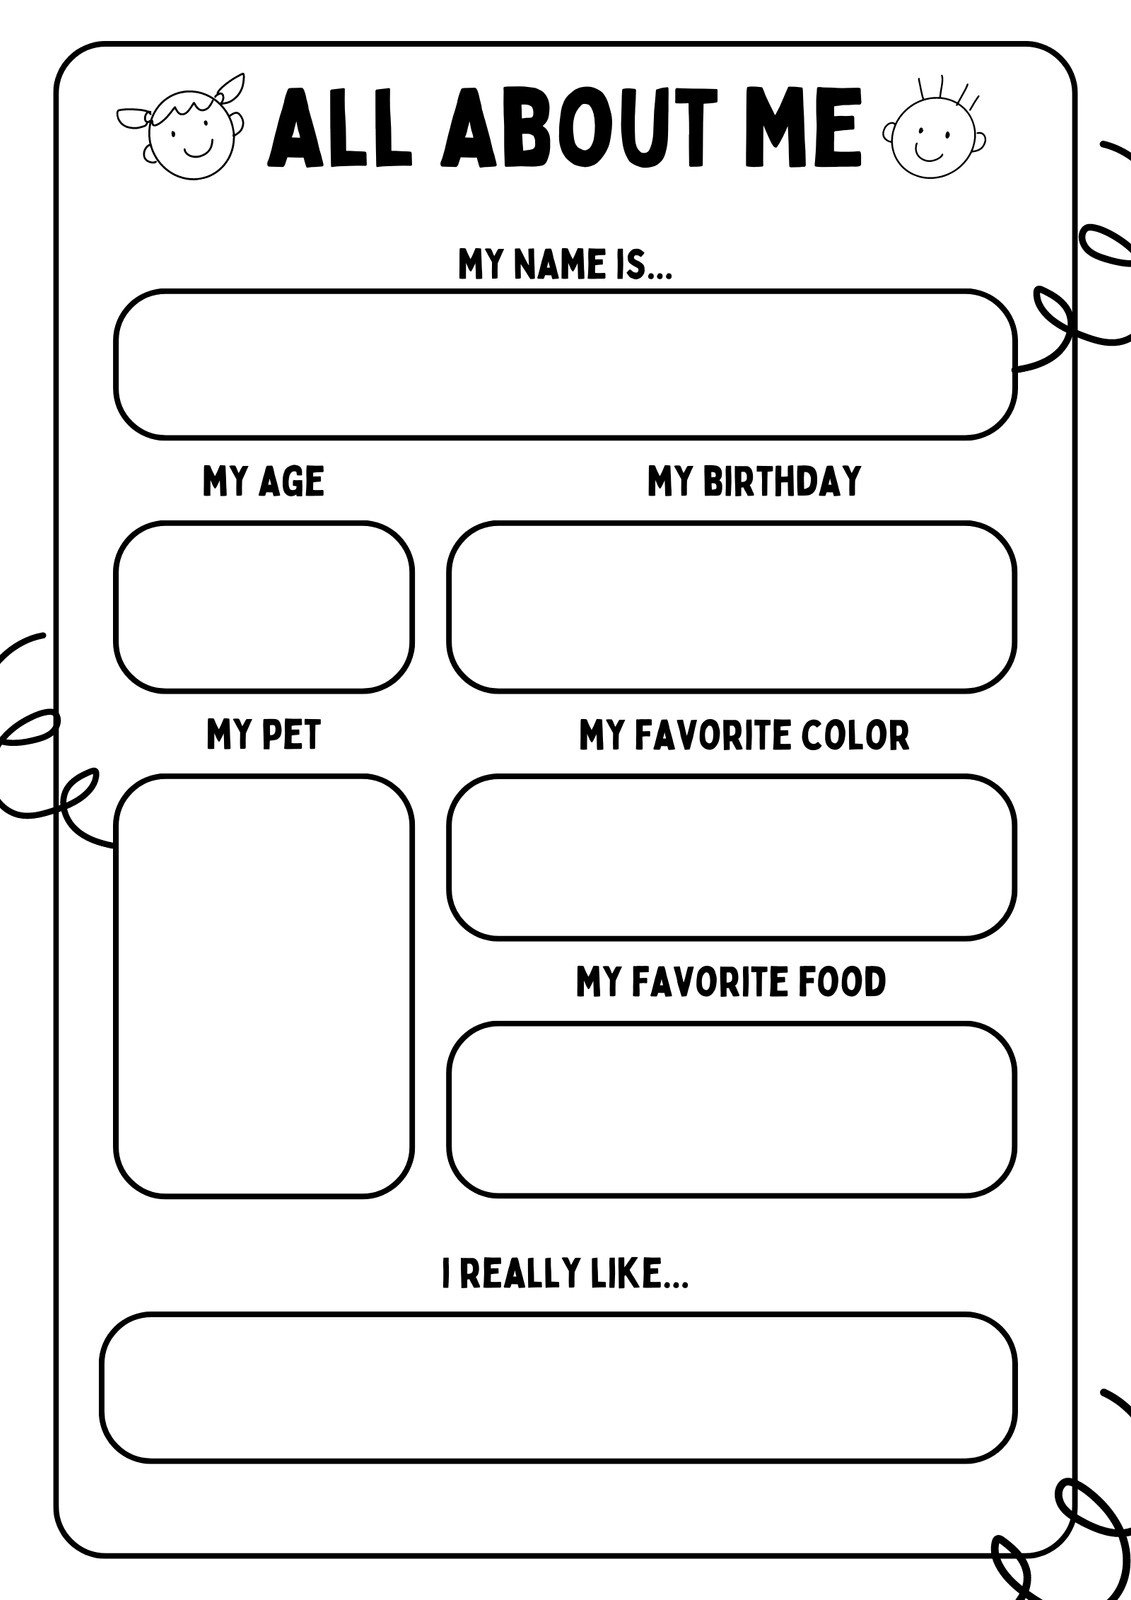 Free And Printable All About Me Worksheet Templates | Canva in All About Me Free Printable